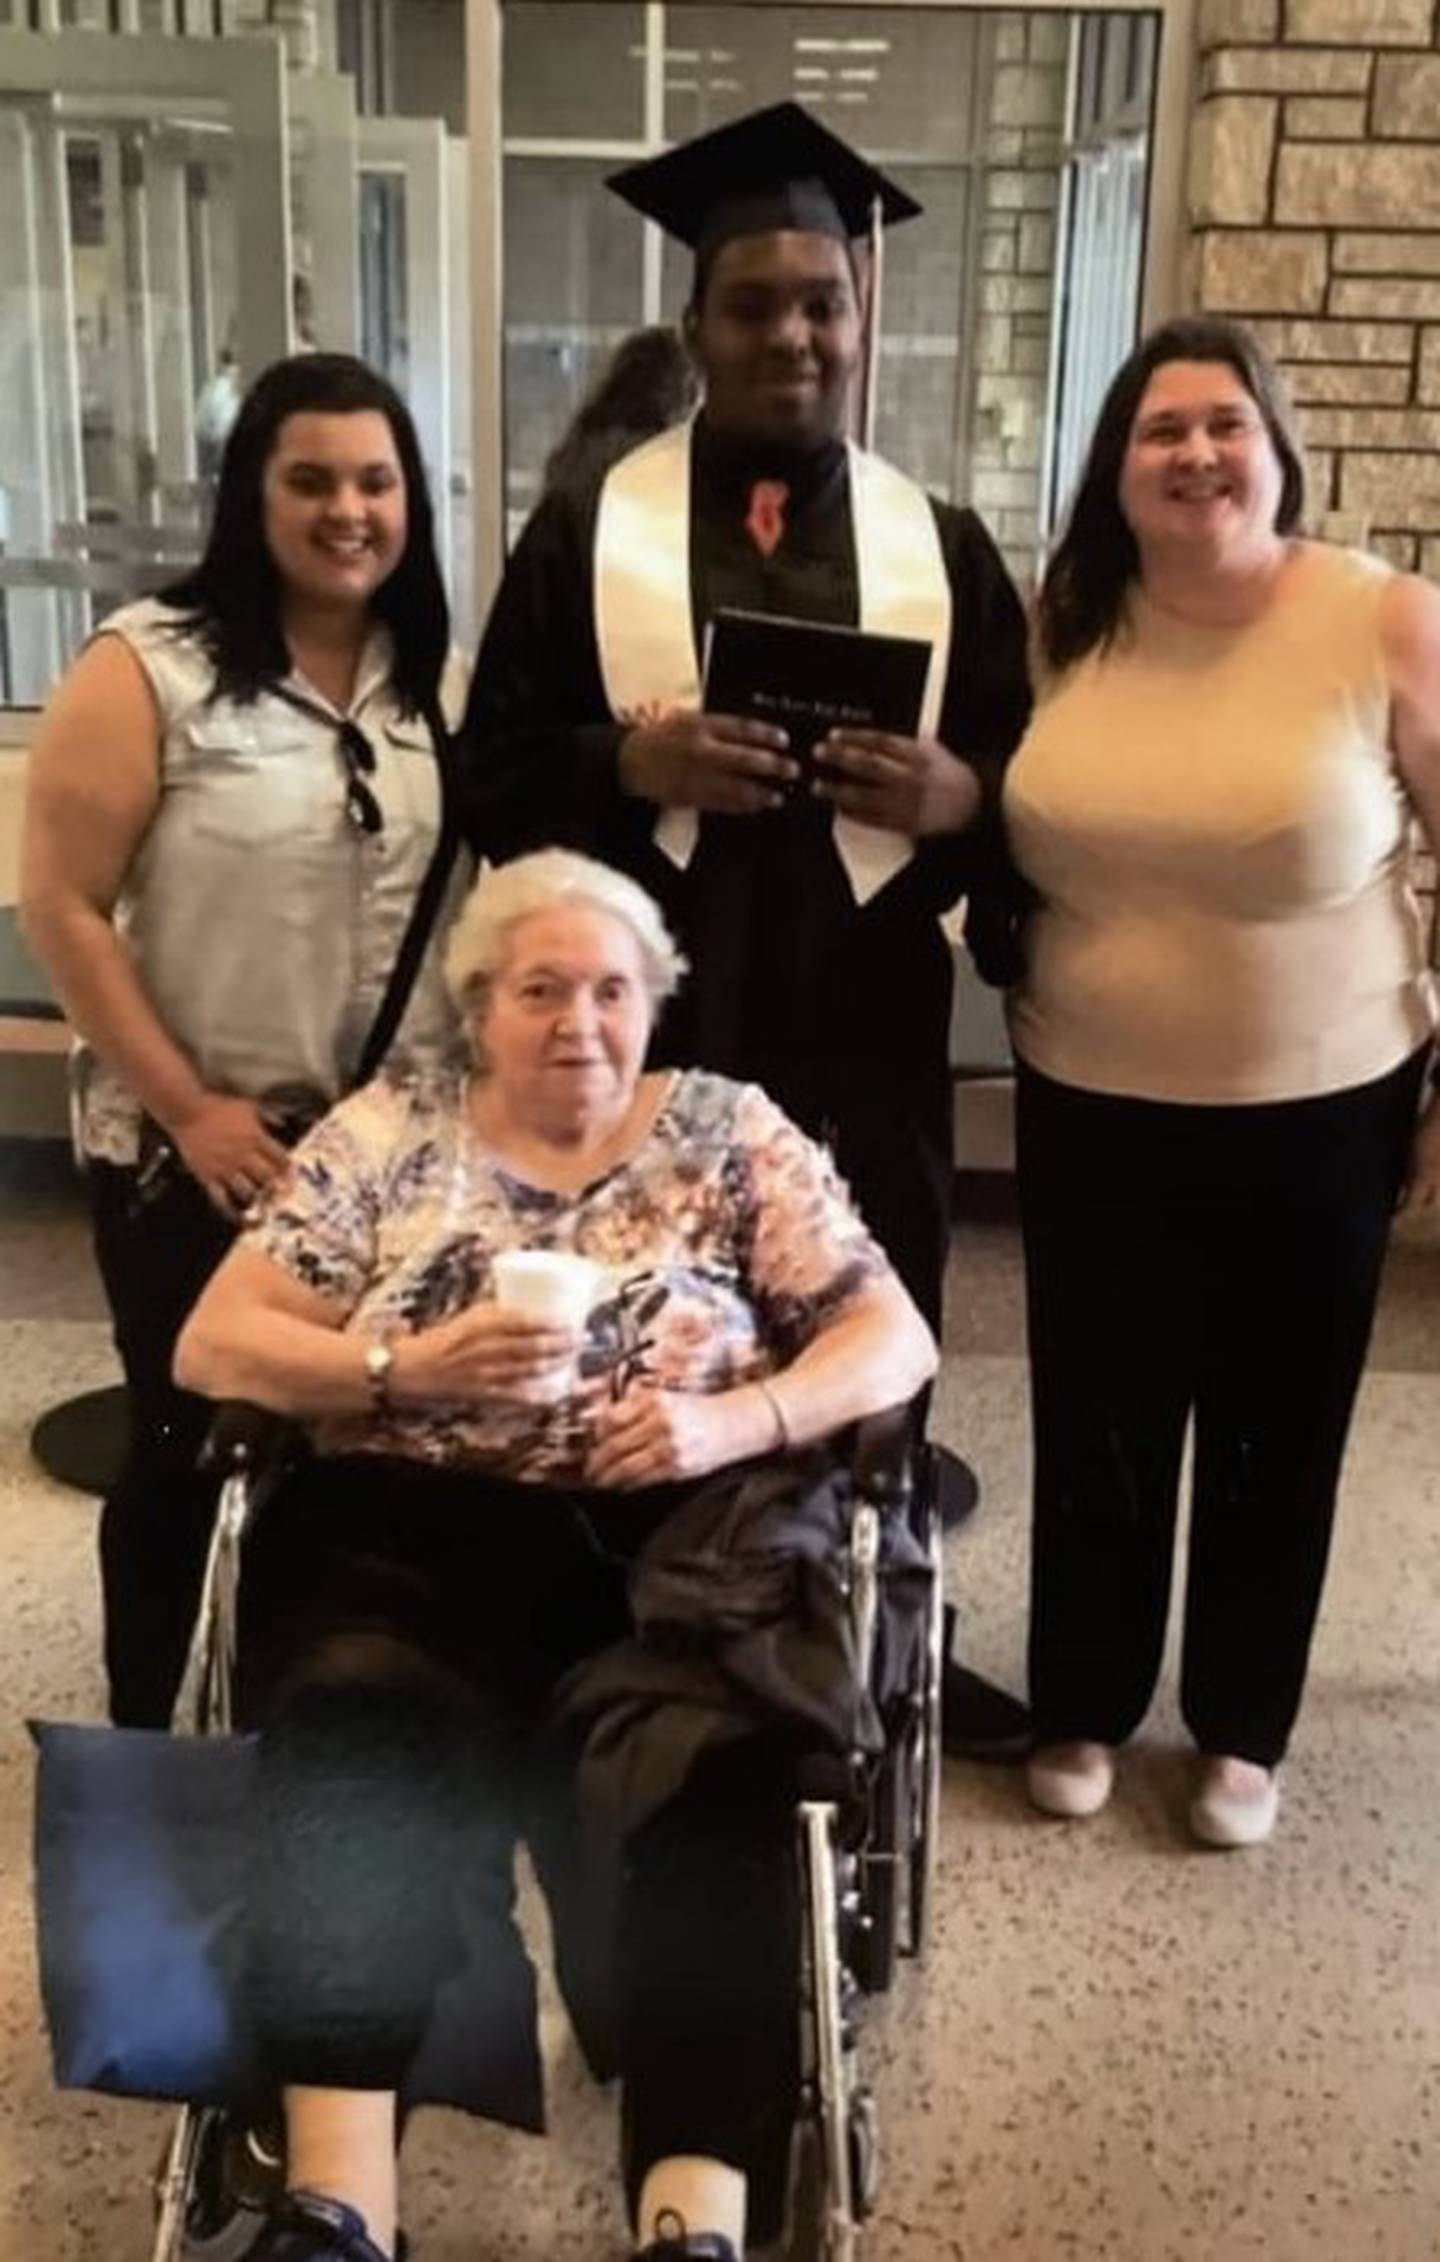 Former Wilmington resident Carol Juricic is pictured with her daughter Sheila (left) and Jeanette (right) at her son Tony's high school graduation. Carol and her husband Paul cared for more than 250 foster children over 25 years and adopted four children.